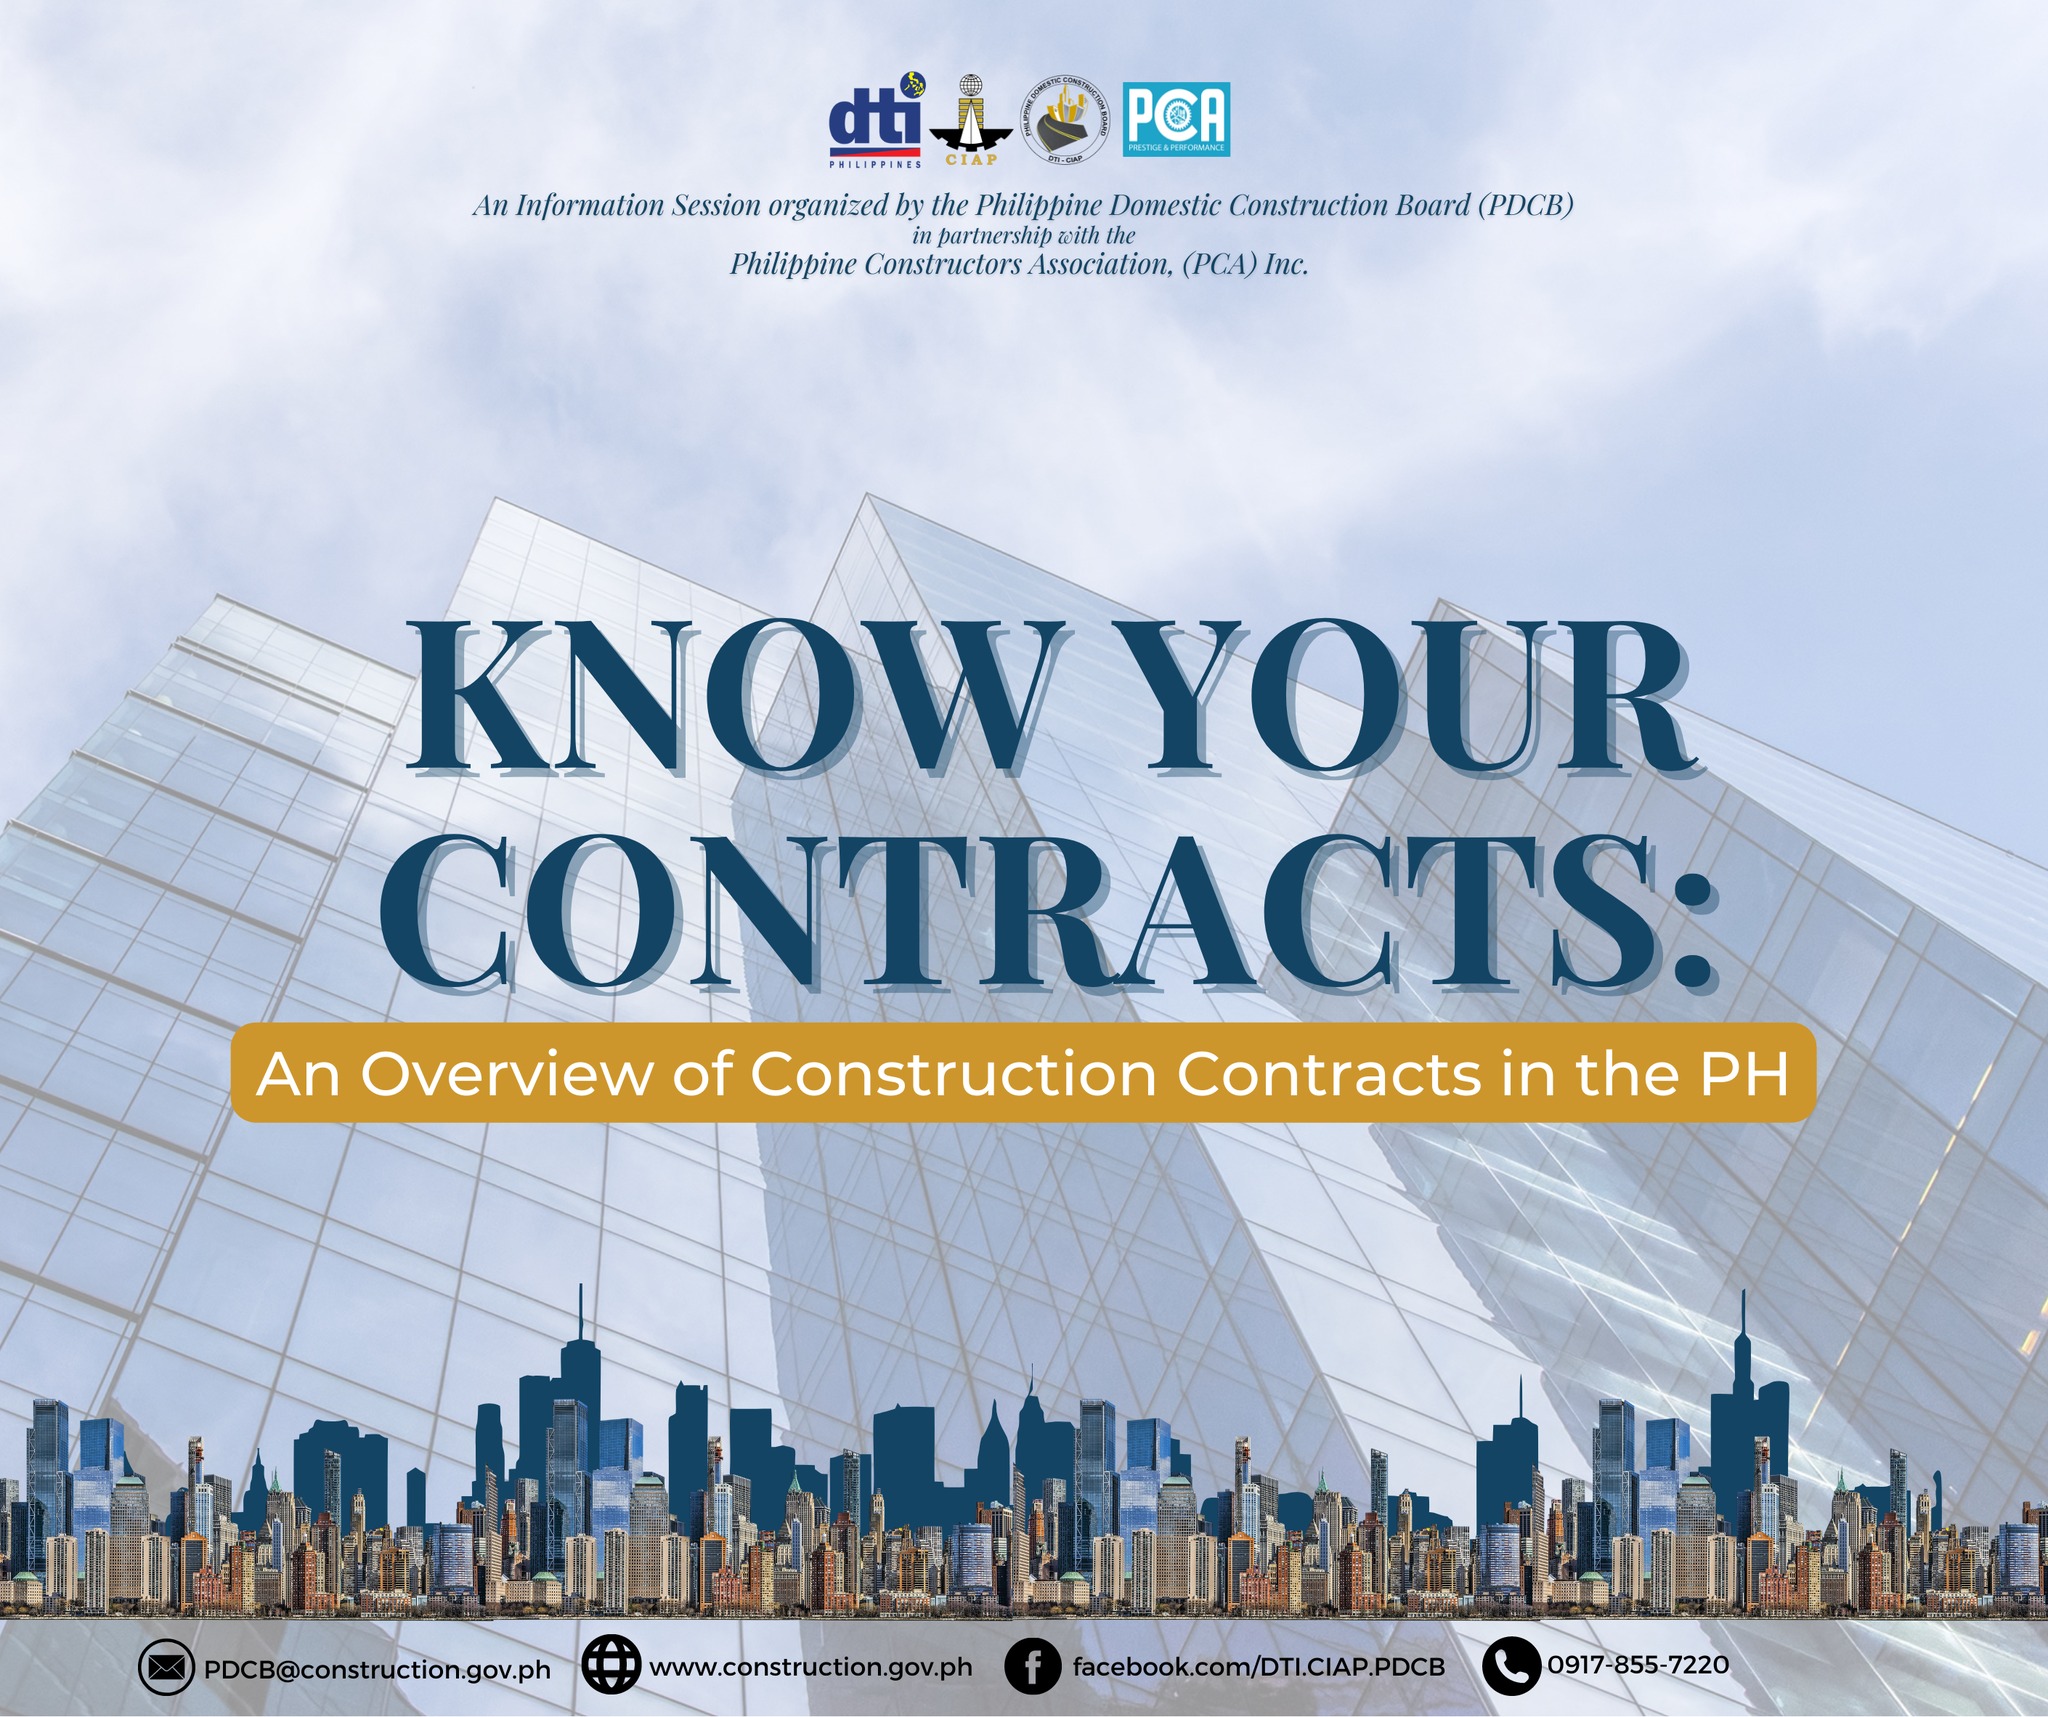 PDCB Conducts “Know Your Contracts: An Overview of Construction Contracts in the Philippines” at the sidelines of Philconstruct Manila 2022